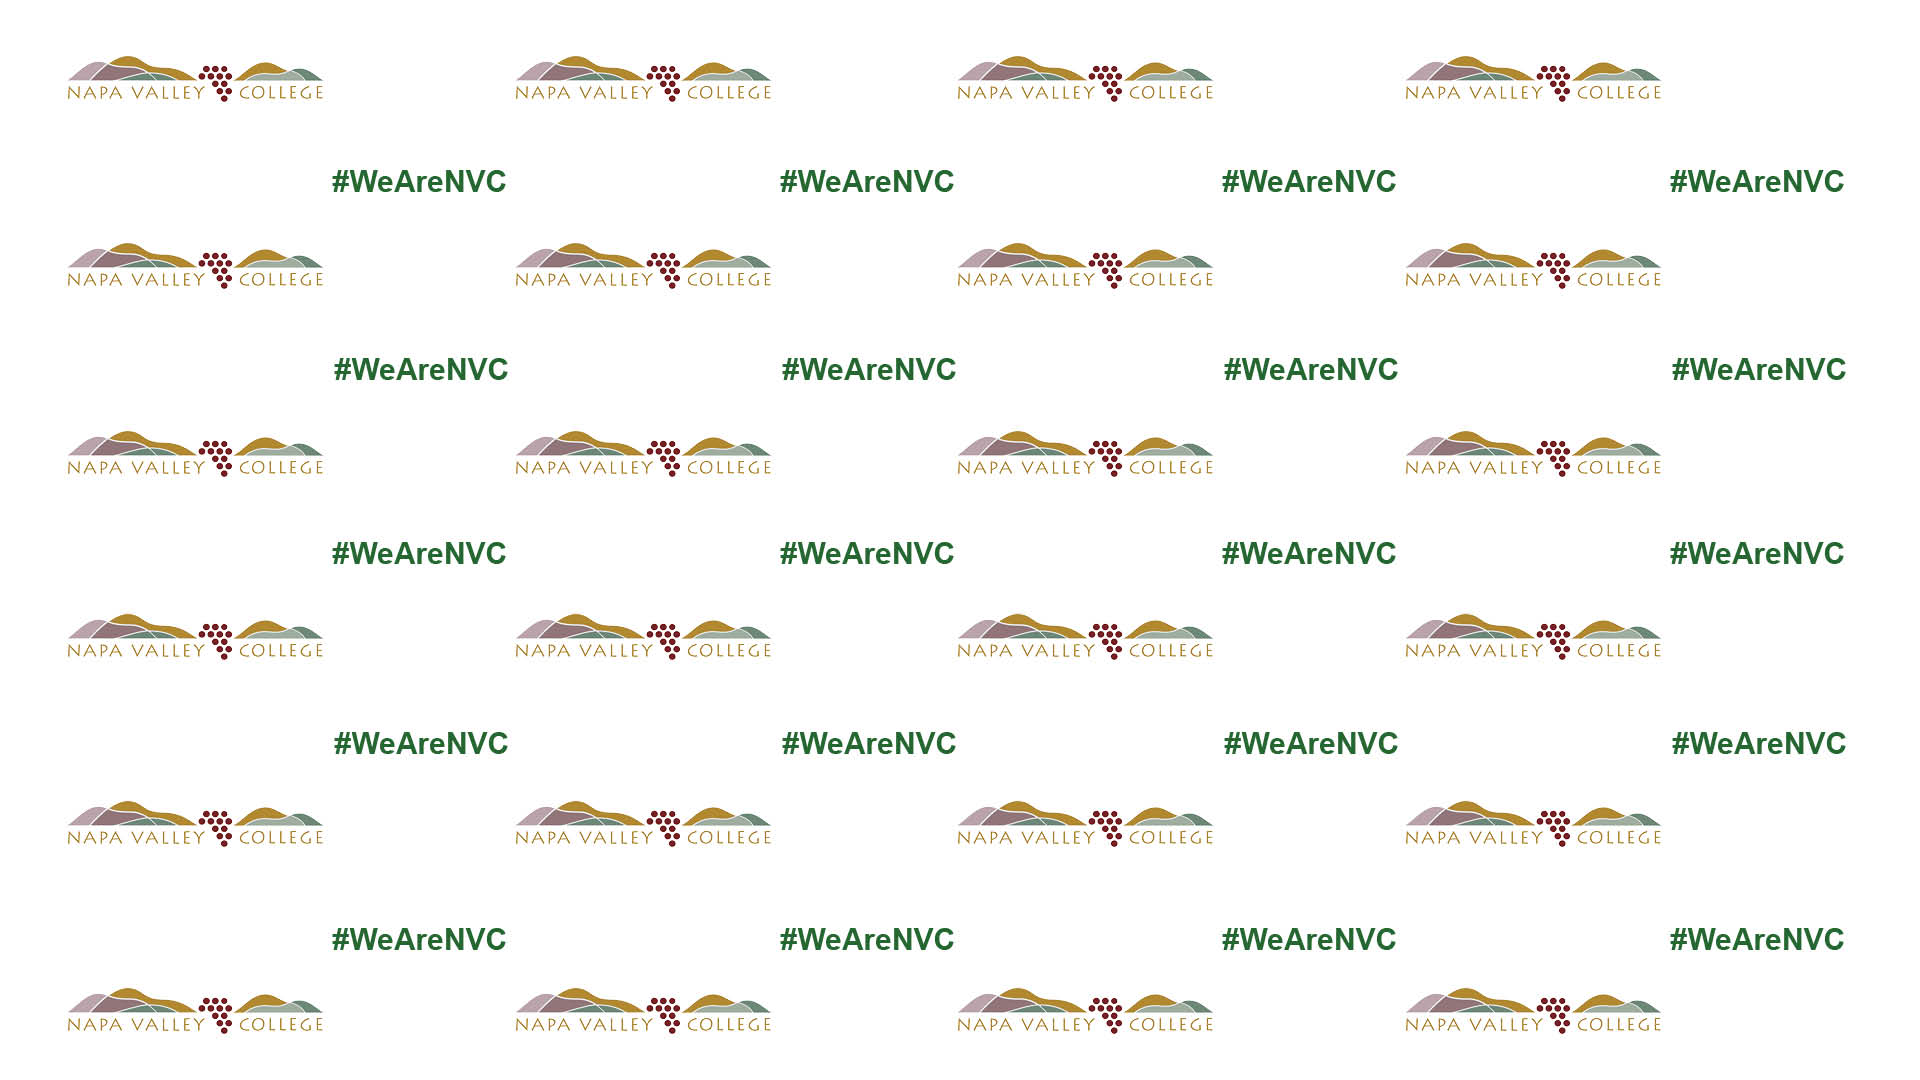 Zoom wall image of the NVC logo